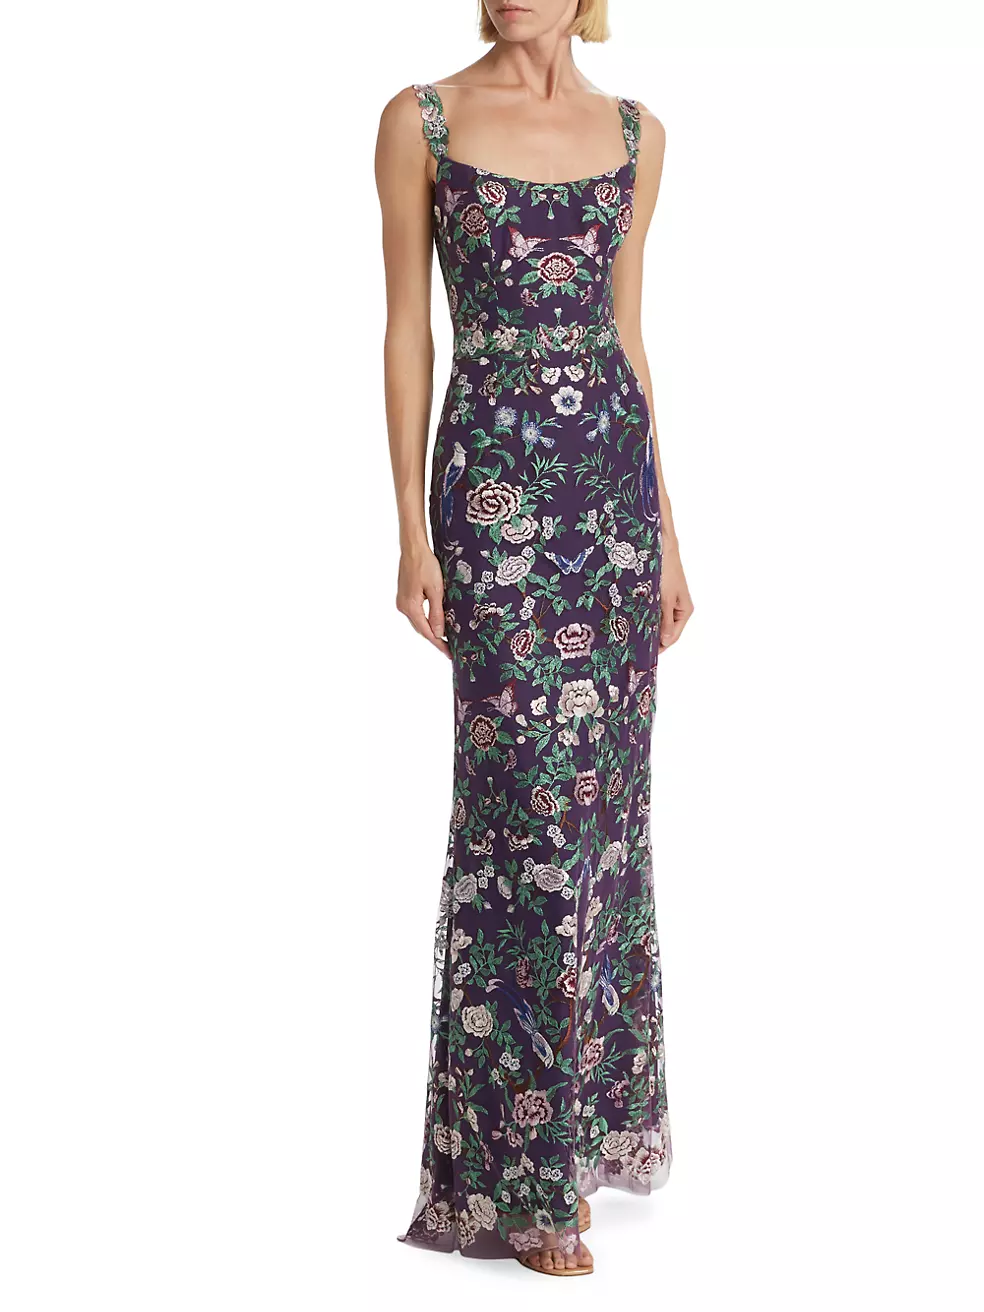 Shop Marchesa Notte Floral-Embroidered Tulle Gown | Saks Fifth Avenue